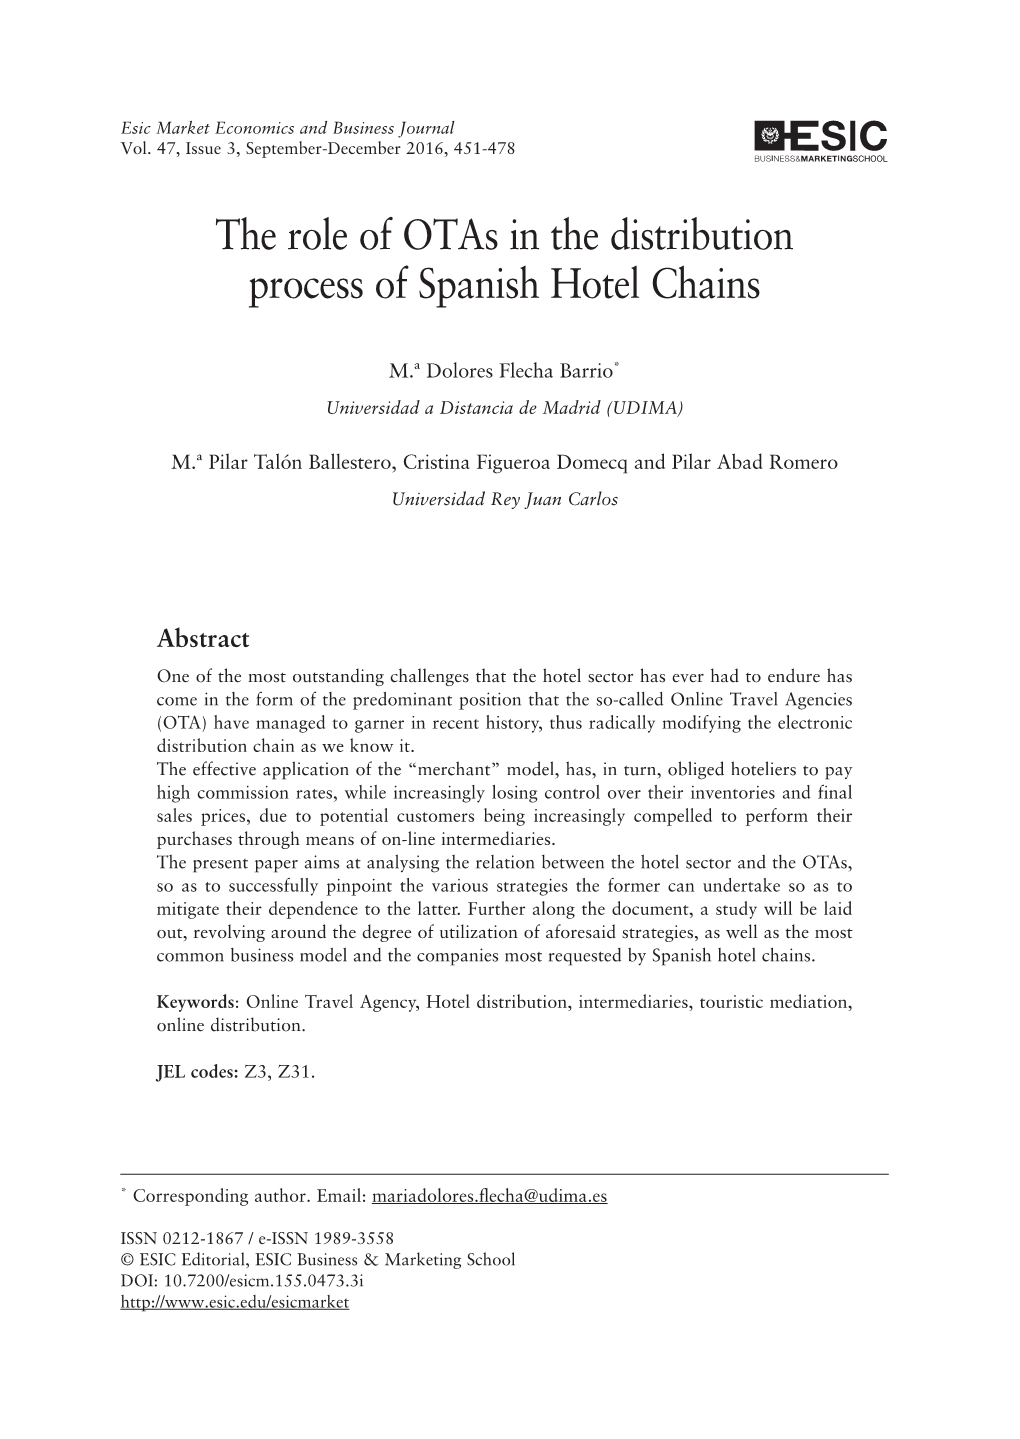 The Role of Otas in the Distribution Process of Spanish Hotel Chains